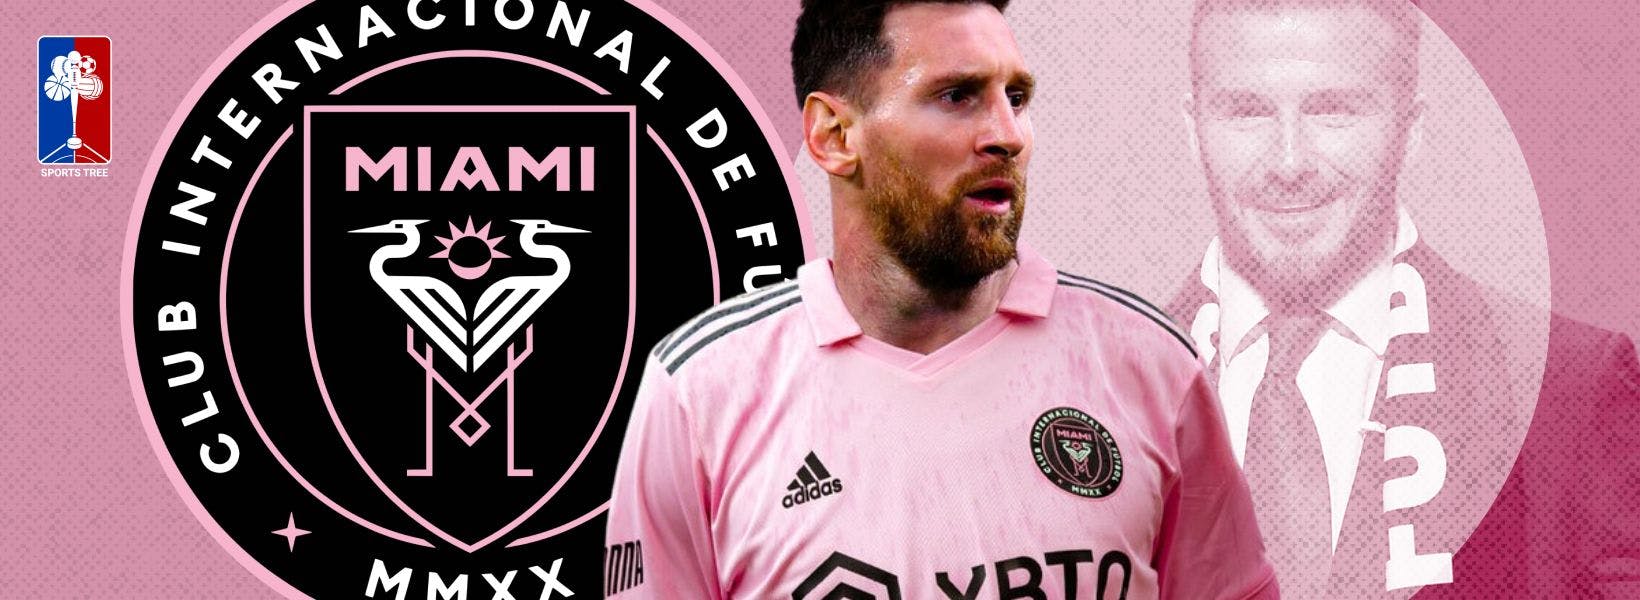 Lionel Messi is soon to make his Inter Miami debut